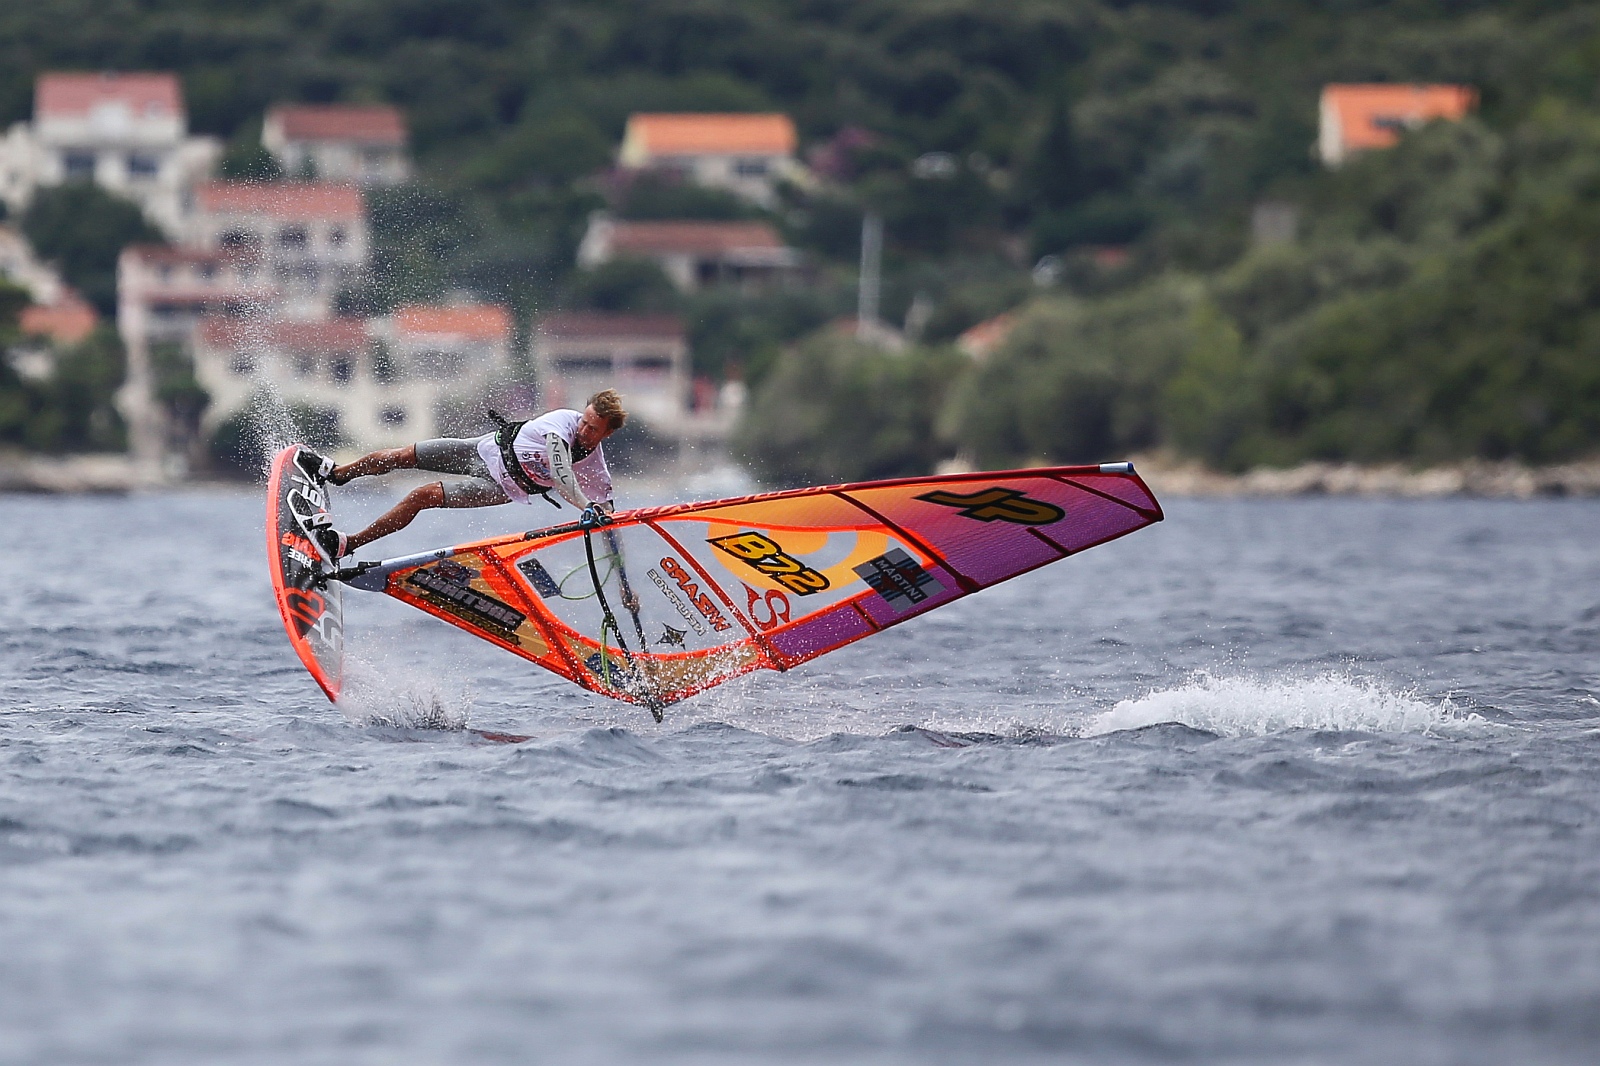 Windy days at the Martini EFPT Croatia in August